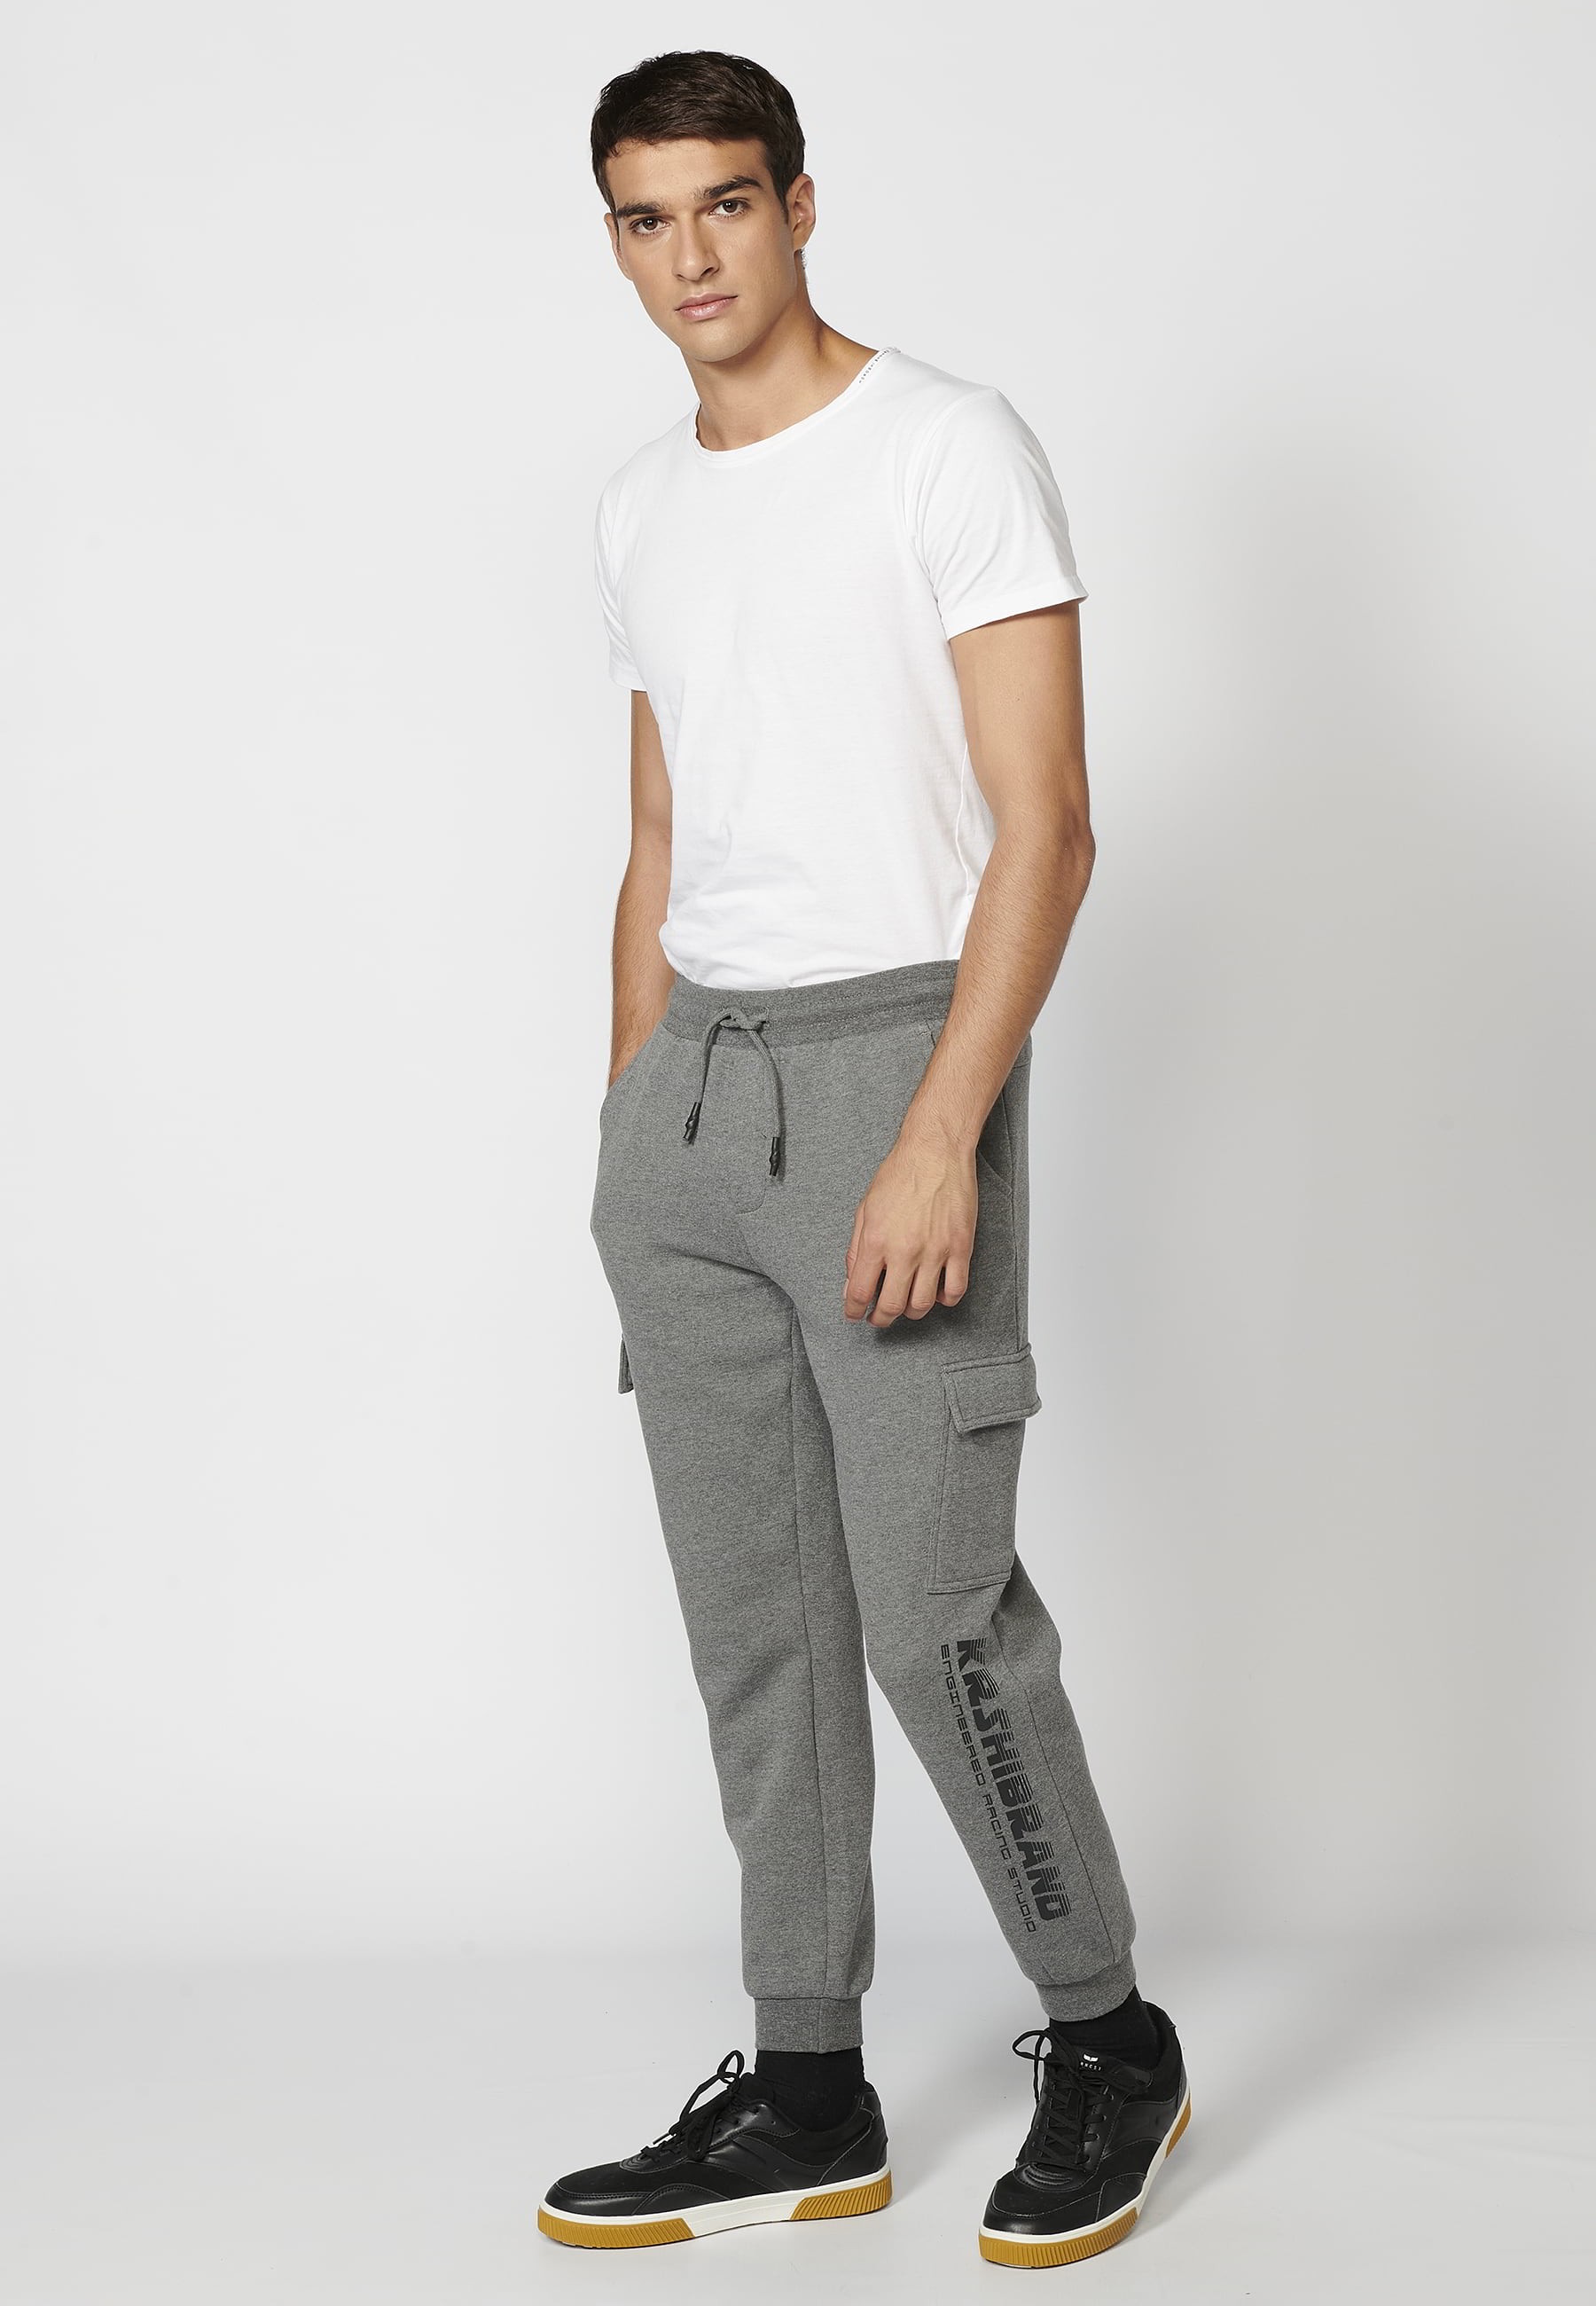 Long jogger pants with adjustable elastic waist, cargo pocket, Gray color for Men